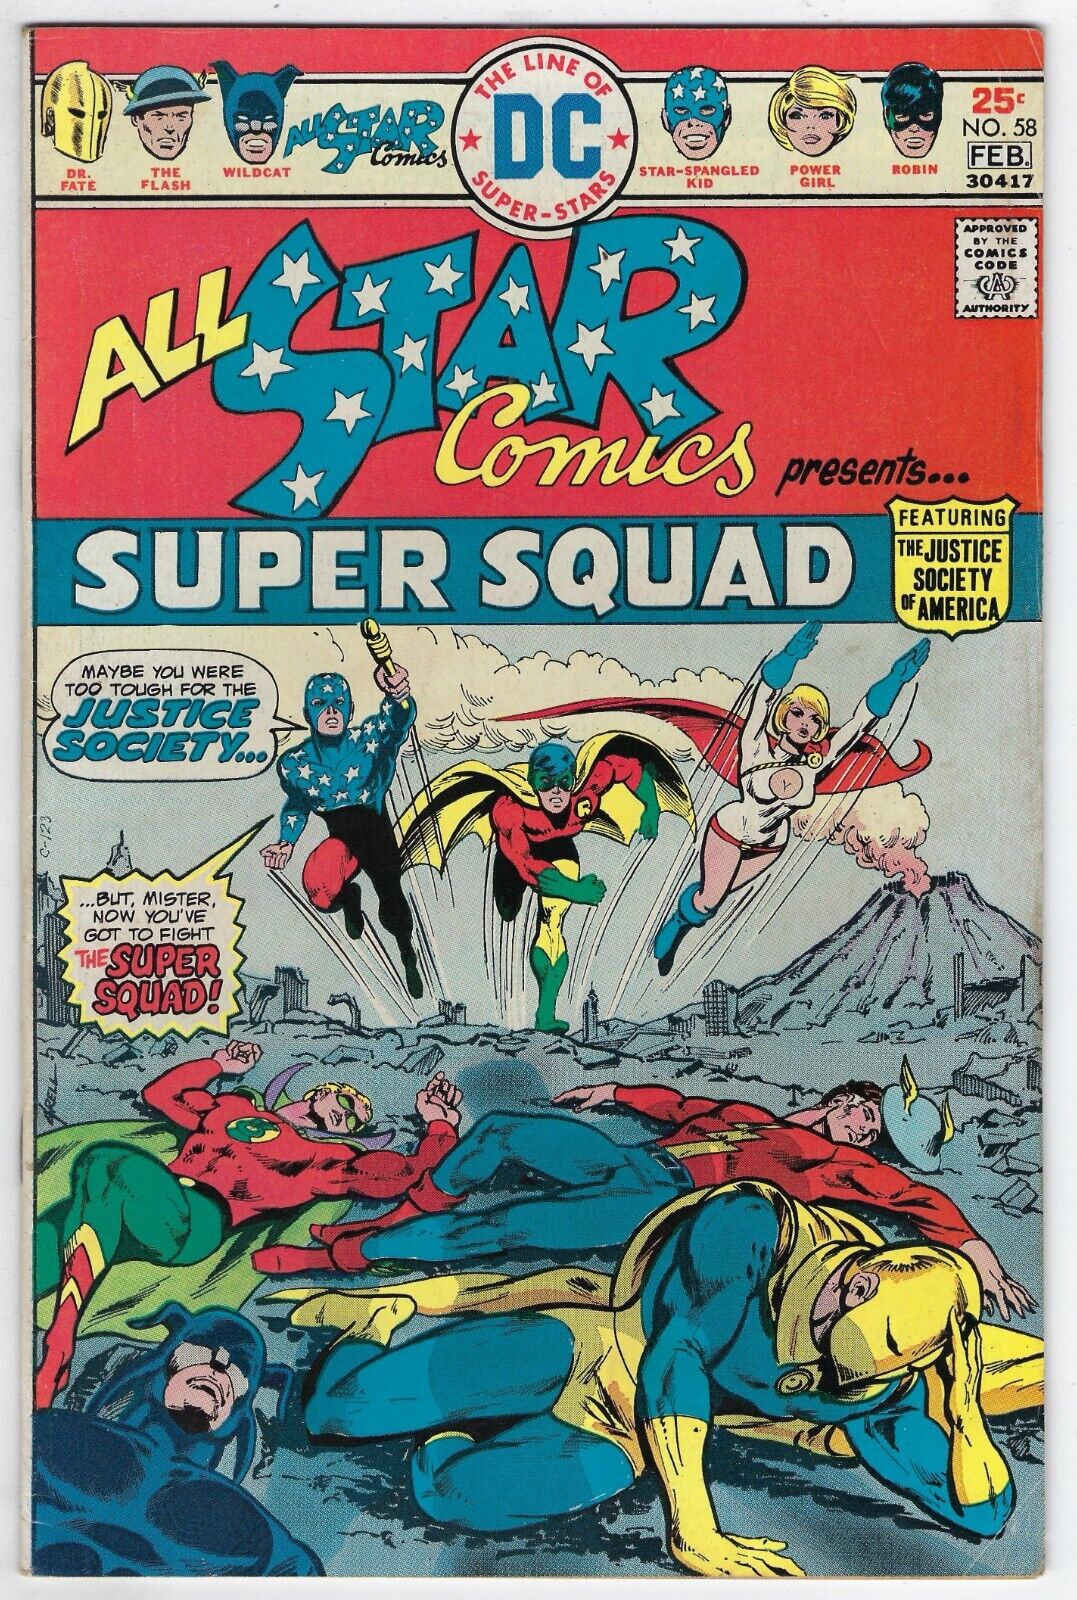 All Star Comics #58 - 1st appearance of Power Girl.